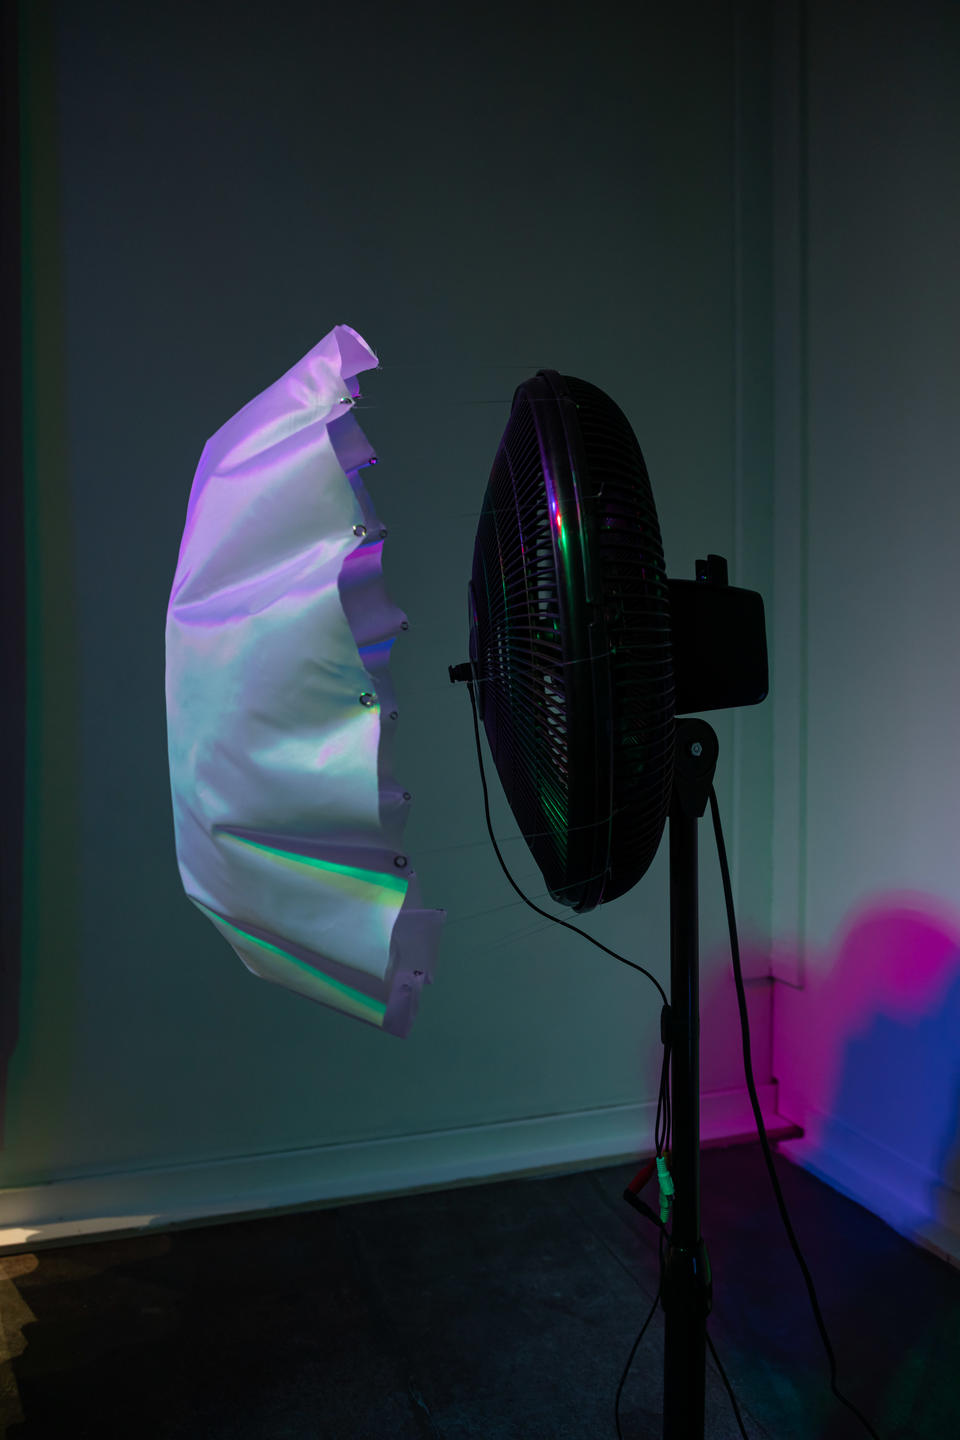 White fabric is attached to a fan and being blown up under colorful light.